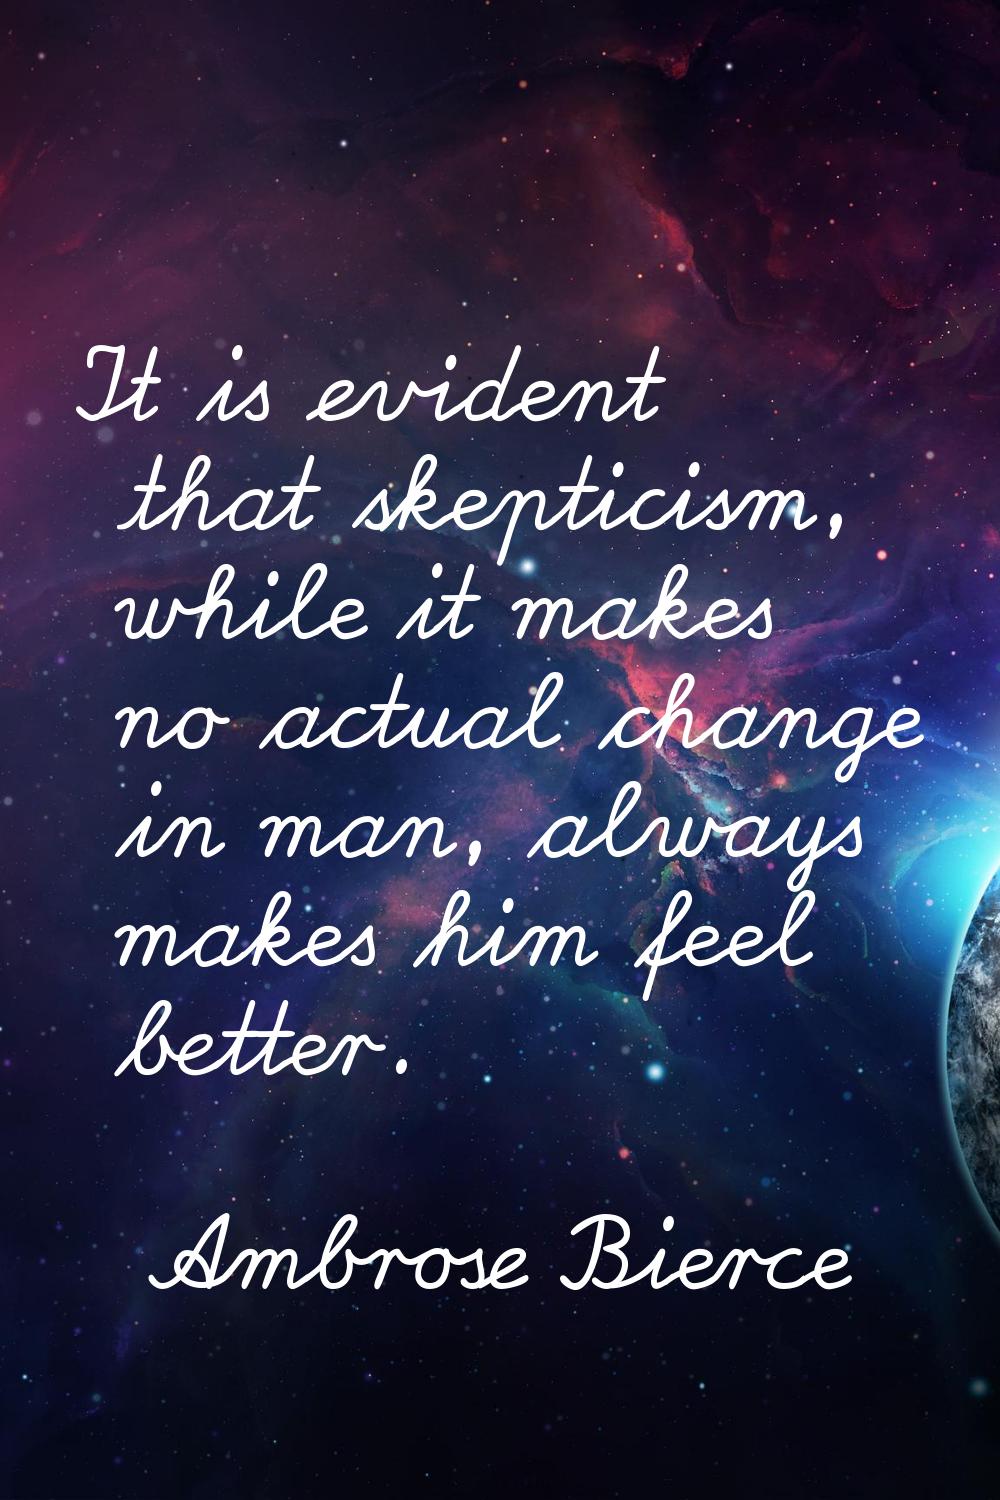 It is evident that skepticism, while it makes no actual change in man, always makes him feel better